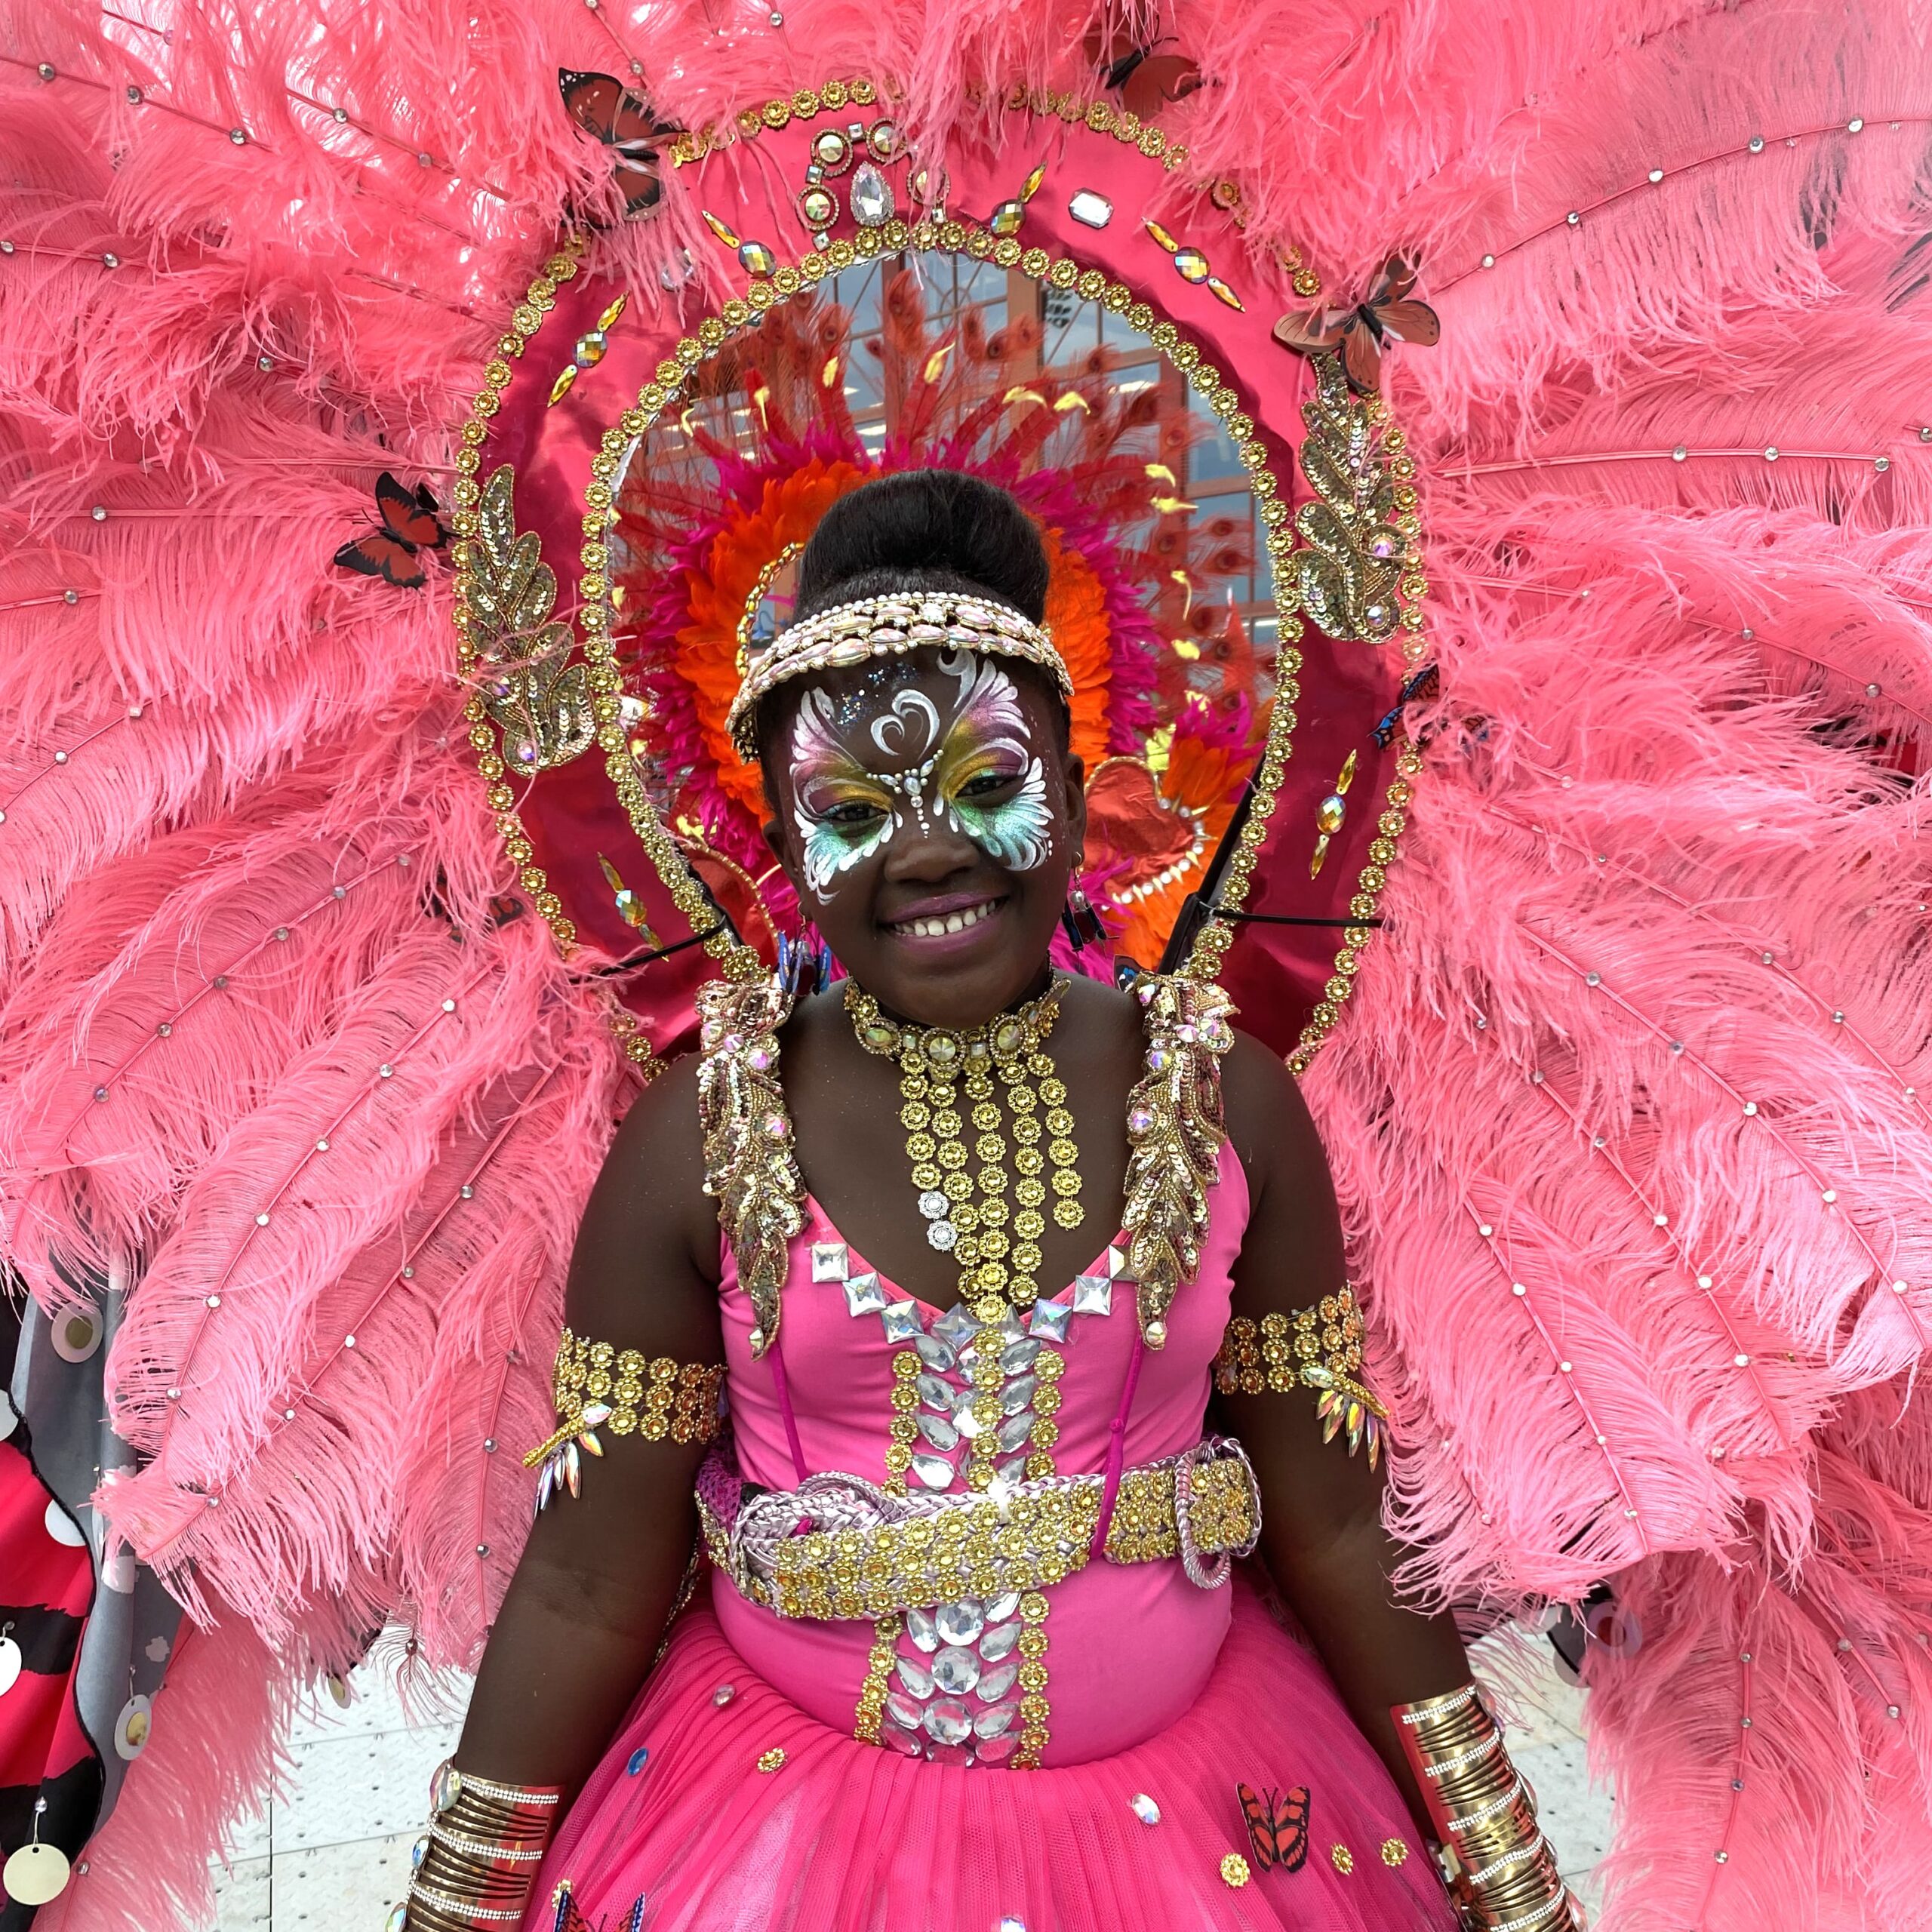 https://miamicarnival.org/wp-content/uploads/2022/10/Events-Jr-Carnival-scaled.jpg